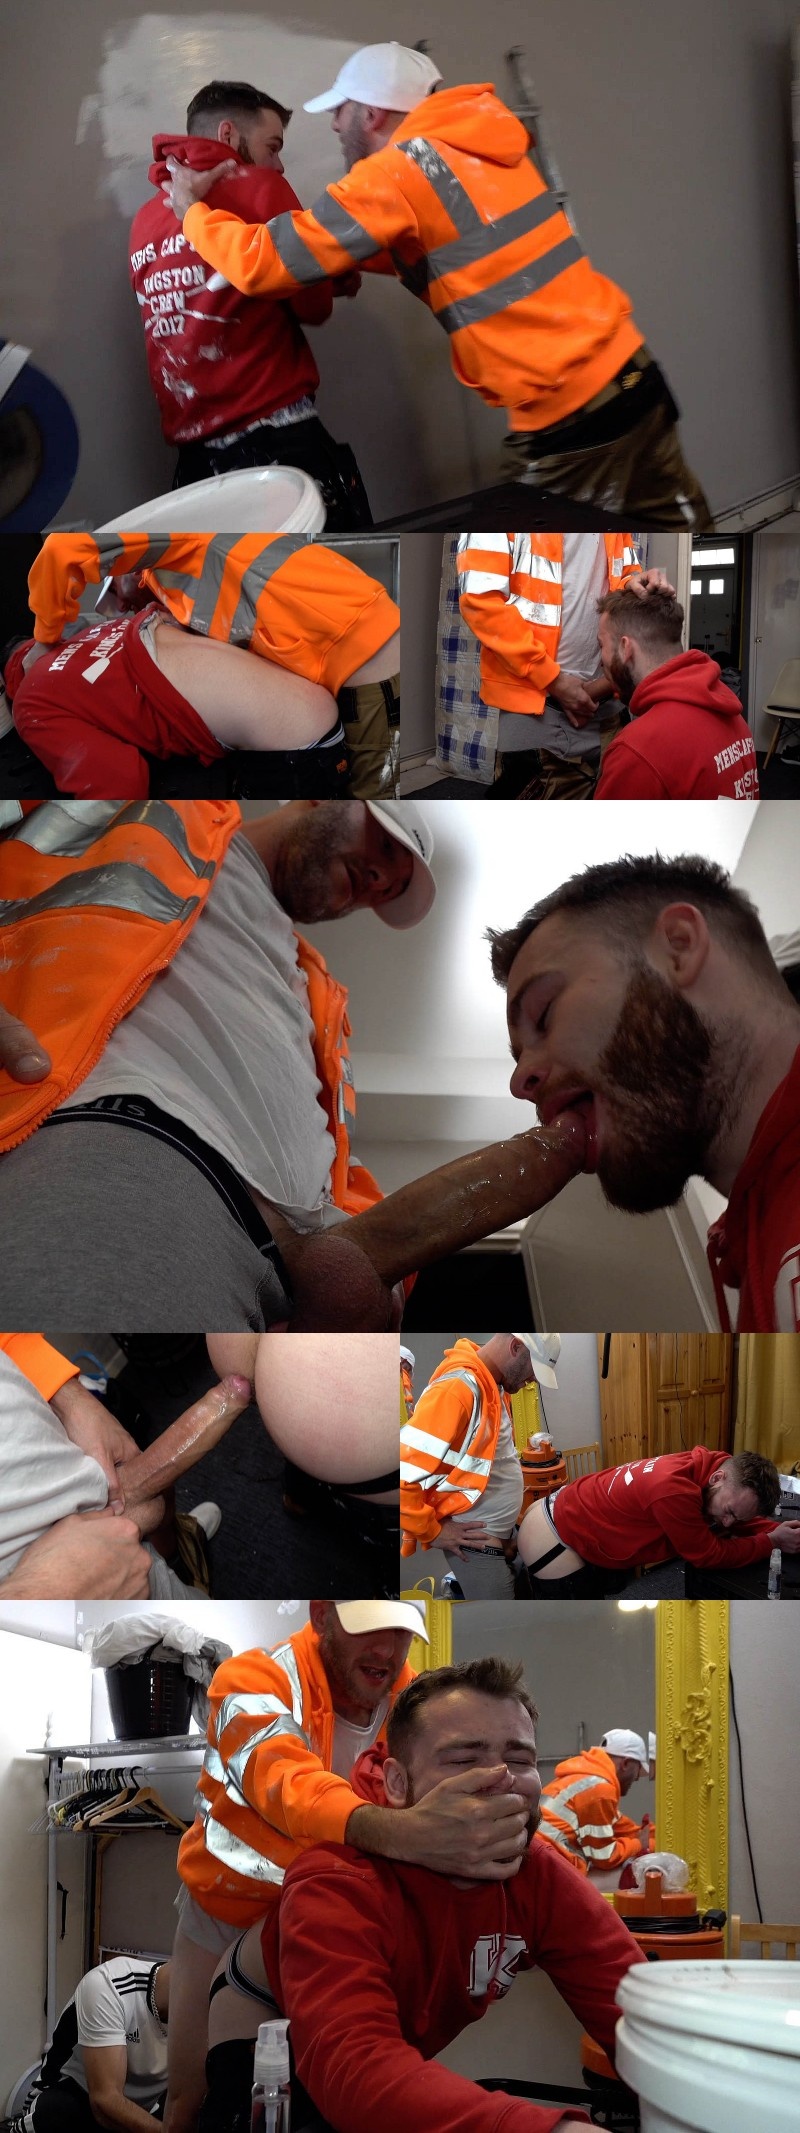 Hung Painter Takes Out Anger on Apprentice’s Bum Hole!